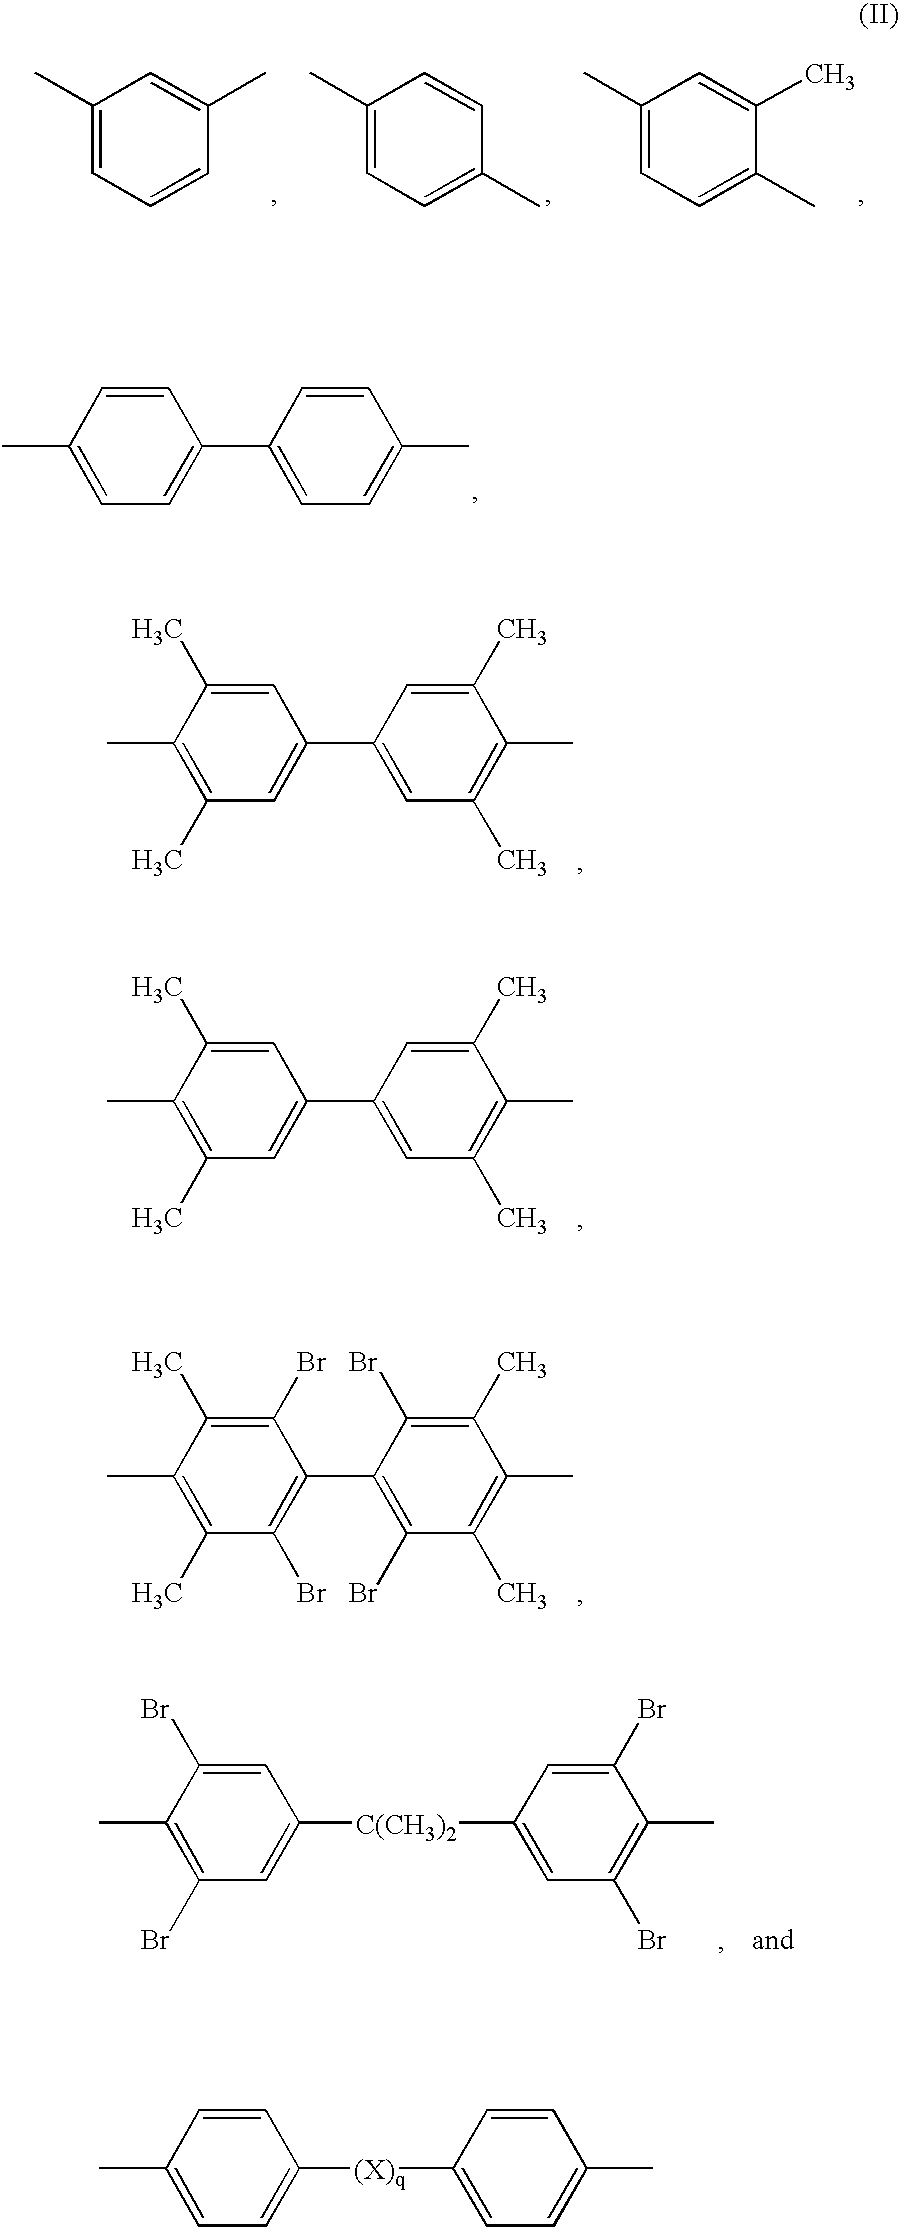 Polyetherimide composition, method, and article